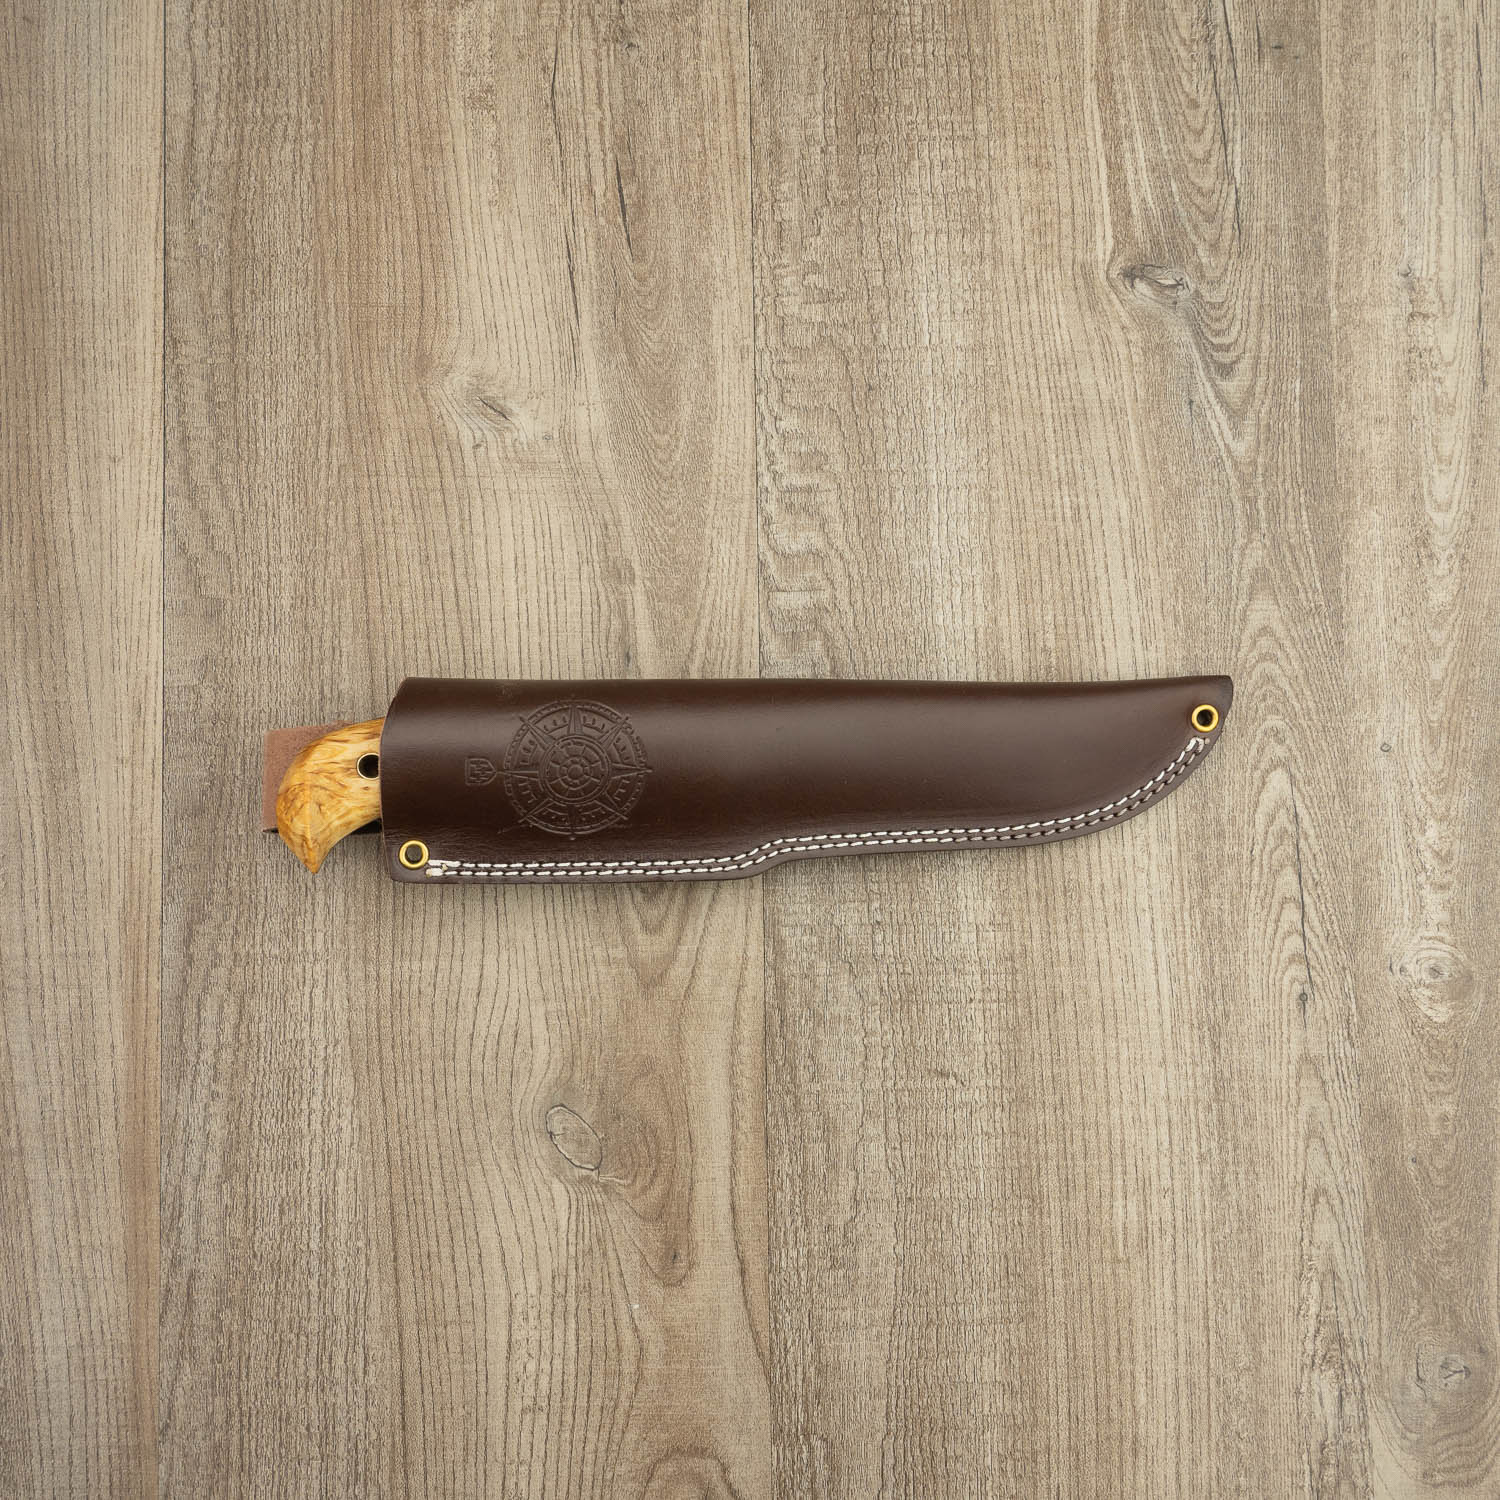 Helle Knives Nord